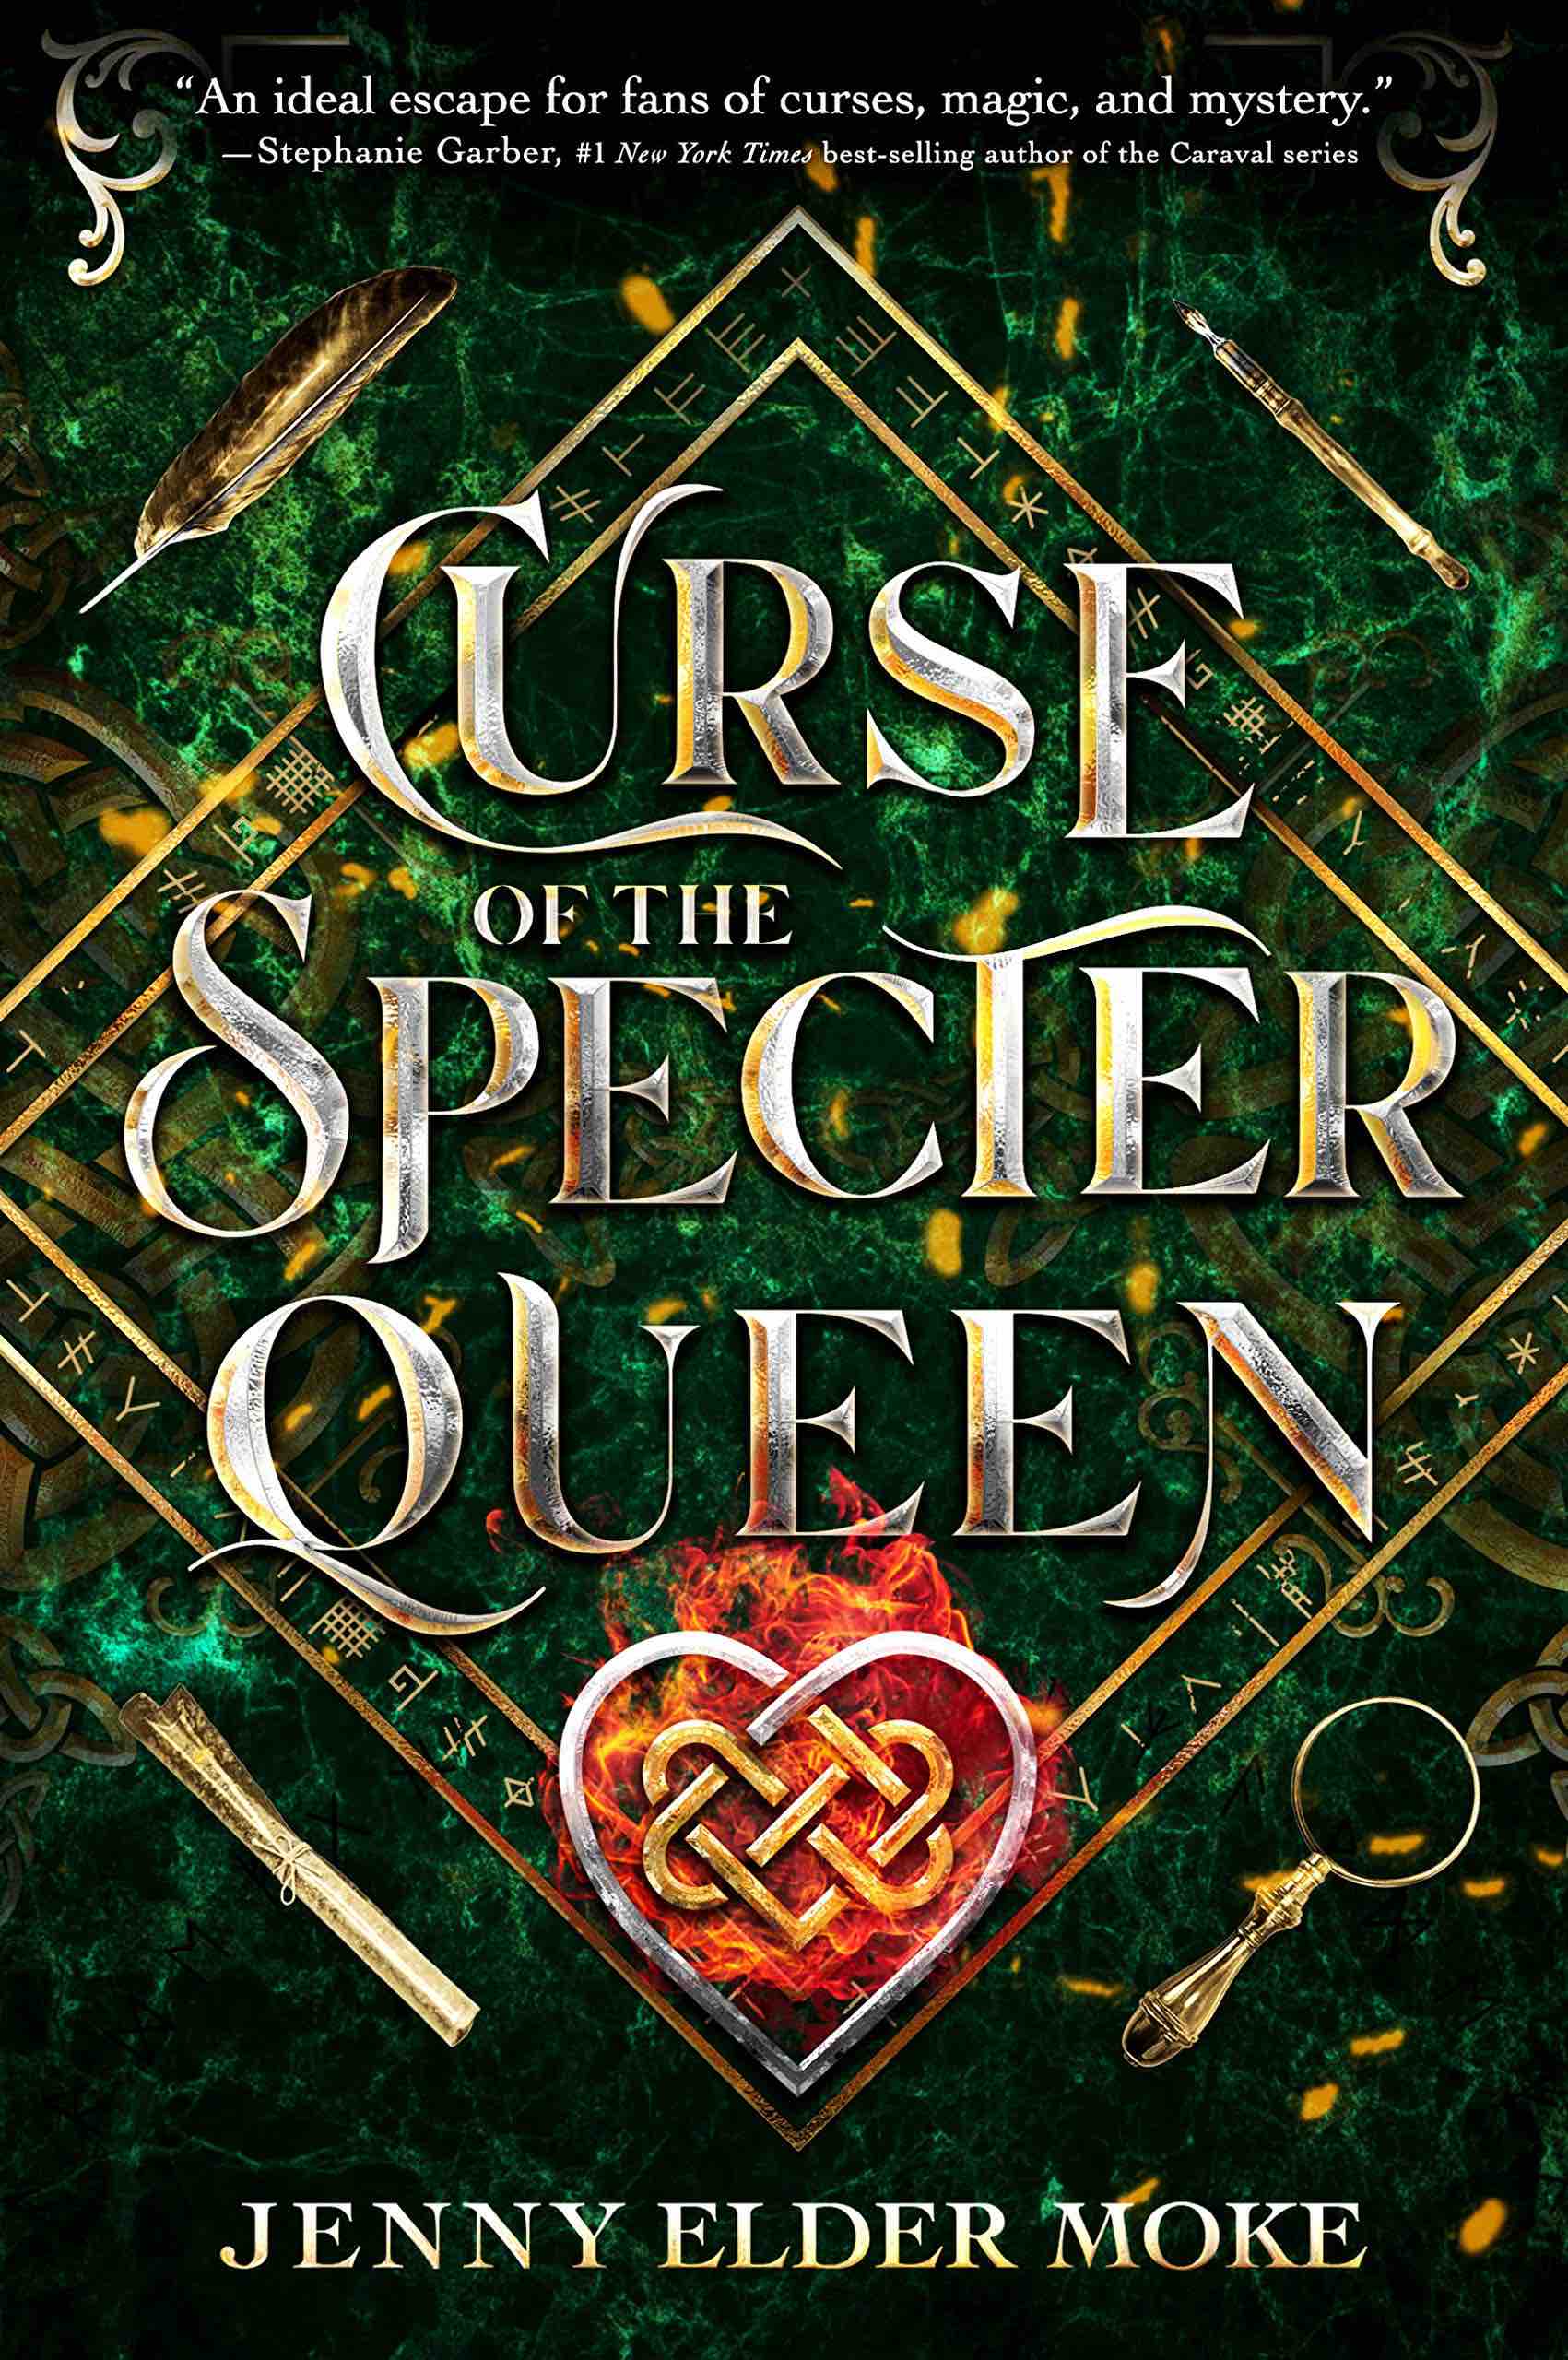 Curse of the Specter Queen